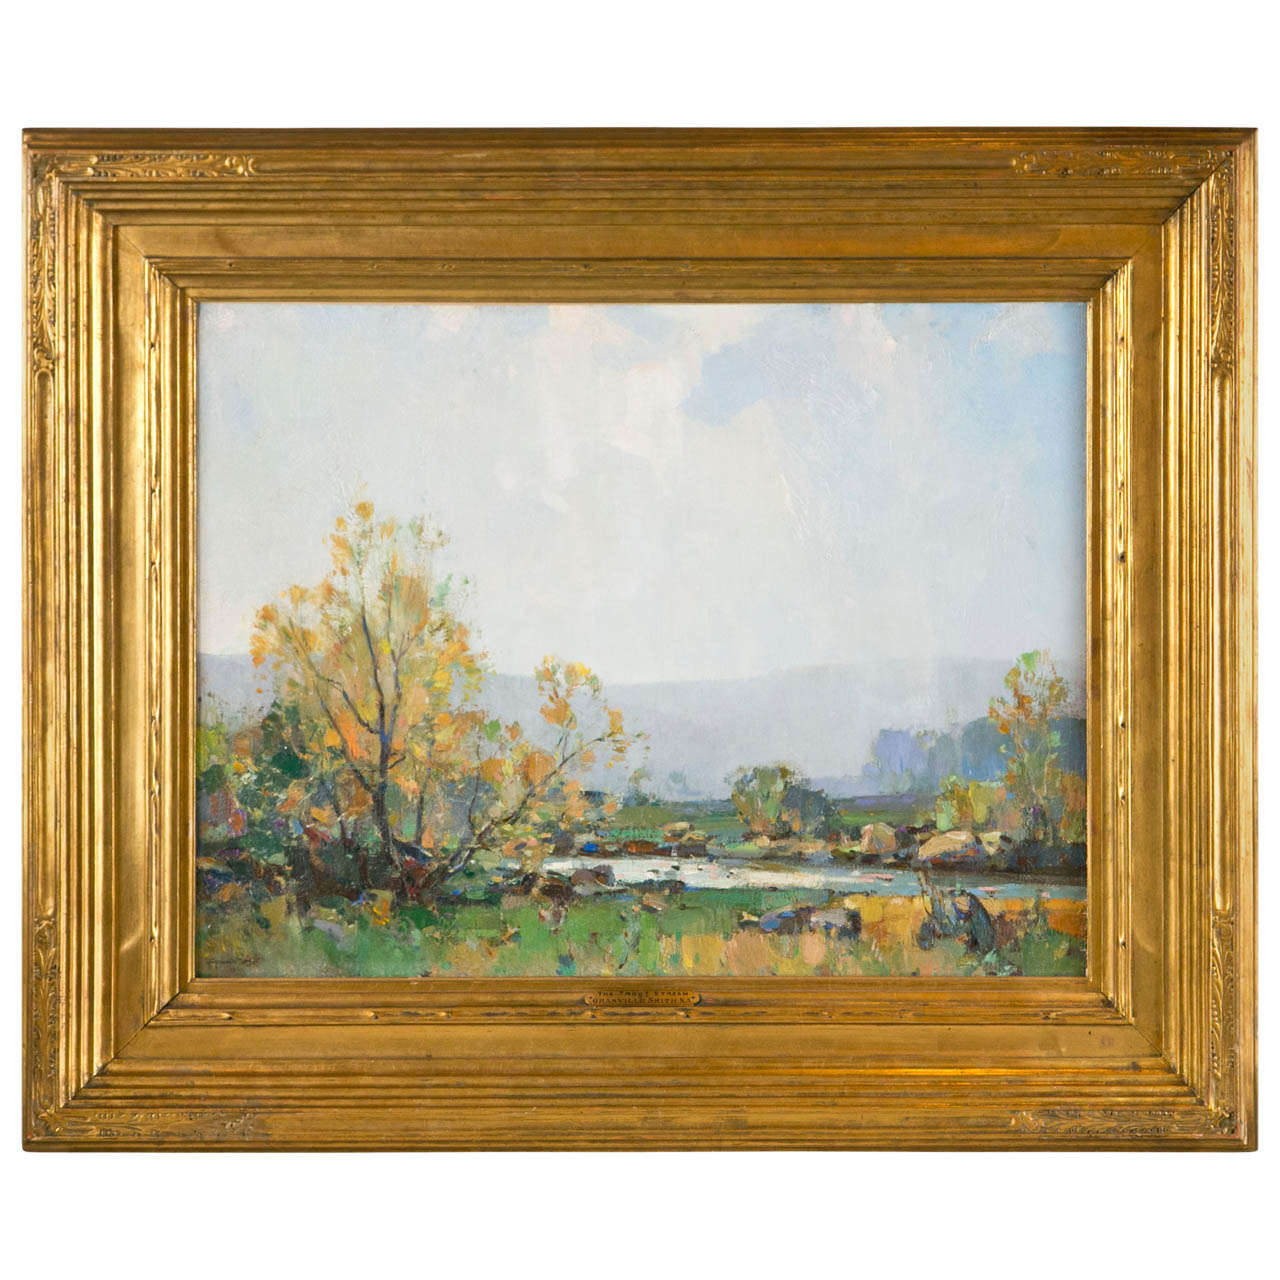 Walter Granville-Smith Oil on Canvas Titled "The Trout Stream"